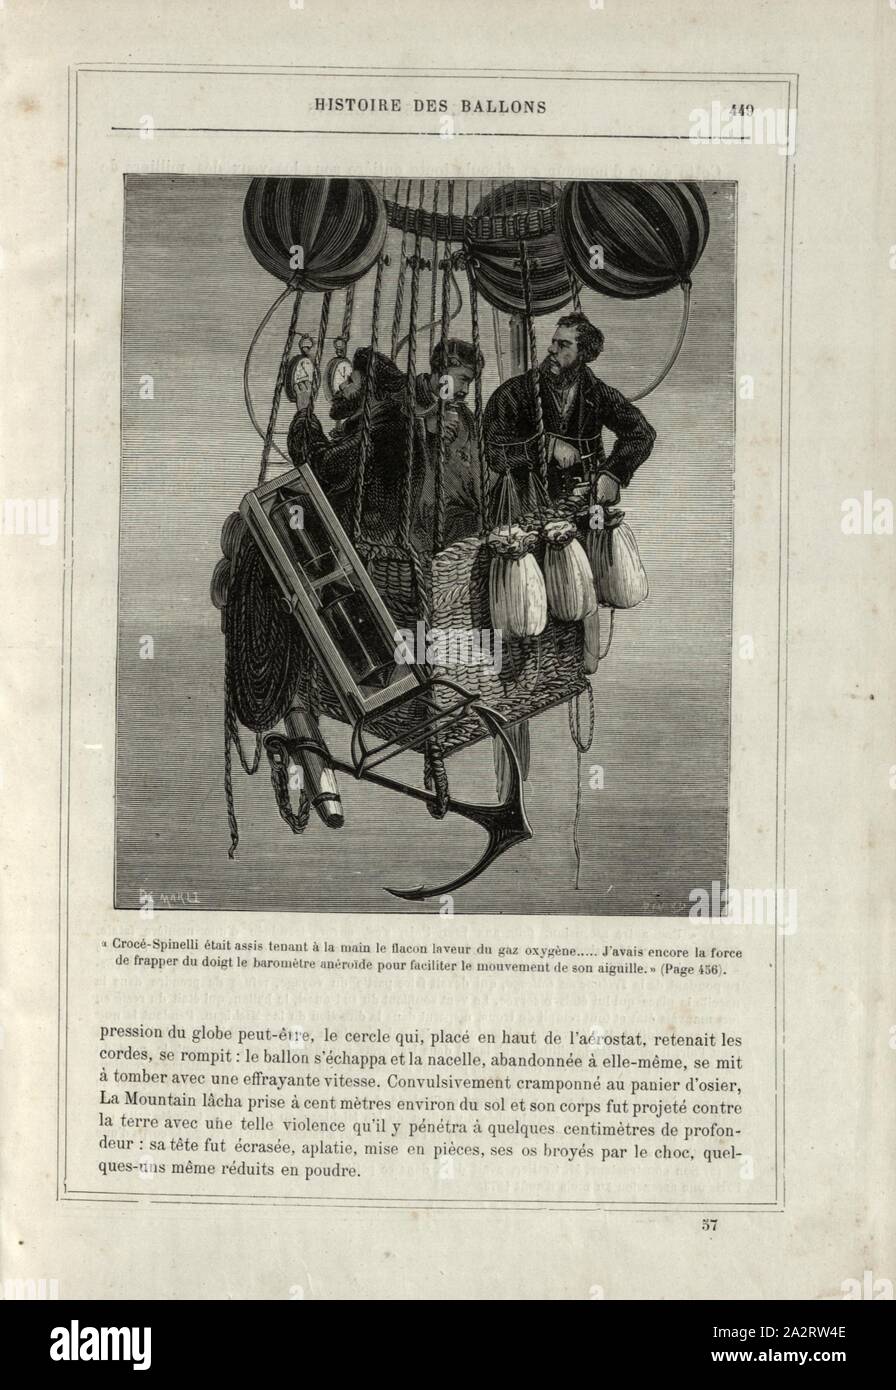 Crocé-Spinelli sat with the Oxygen Gas Flask in his hand ..... I still had the strength to tap the aneroid barometer to make it easier to move his needle, Théodore Henri Sivel, Joseph Crocé-Spinelli and Gaston Tissandier during a flight in the hot-air balloon 'Zenith' 1874, Signed: Demarle; Rénard, Fig. 76, p. 449, Demarle, Gustave-Alphonse (dess.); Rénard, A. (sc.), 1876, Alfred Sircos; Th. Pallier: Histoire des ballons et des ascensions célèbres avec une préface de Nadar: dessins de A. Tissandier [...]. Paris: F. Roy, 1876 Stock Photo